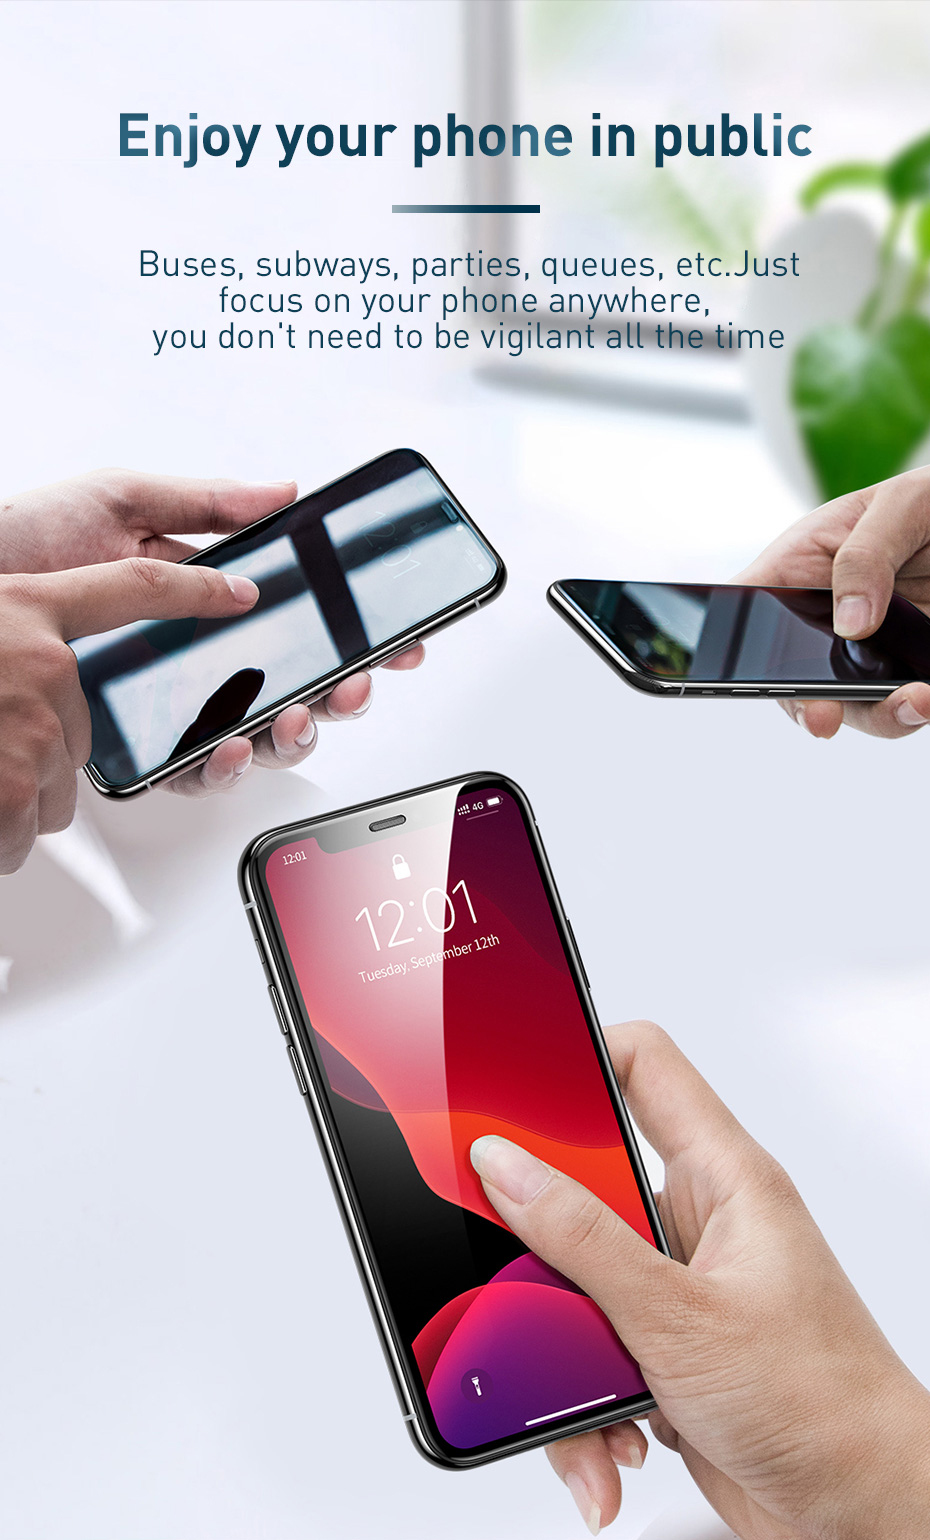 2PCS-Baseus-Anti-peeping-Dustproof-Curved-Edge-Tempered-Glass-Screen-Protector-For-iPhone-XiPhone-XS-1586653-4